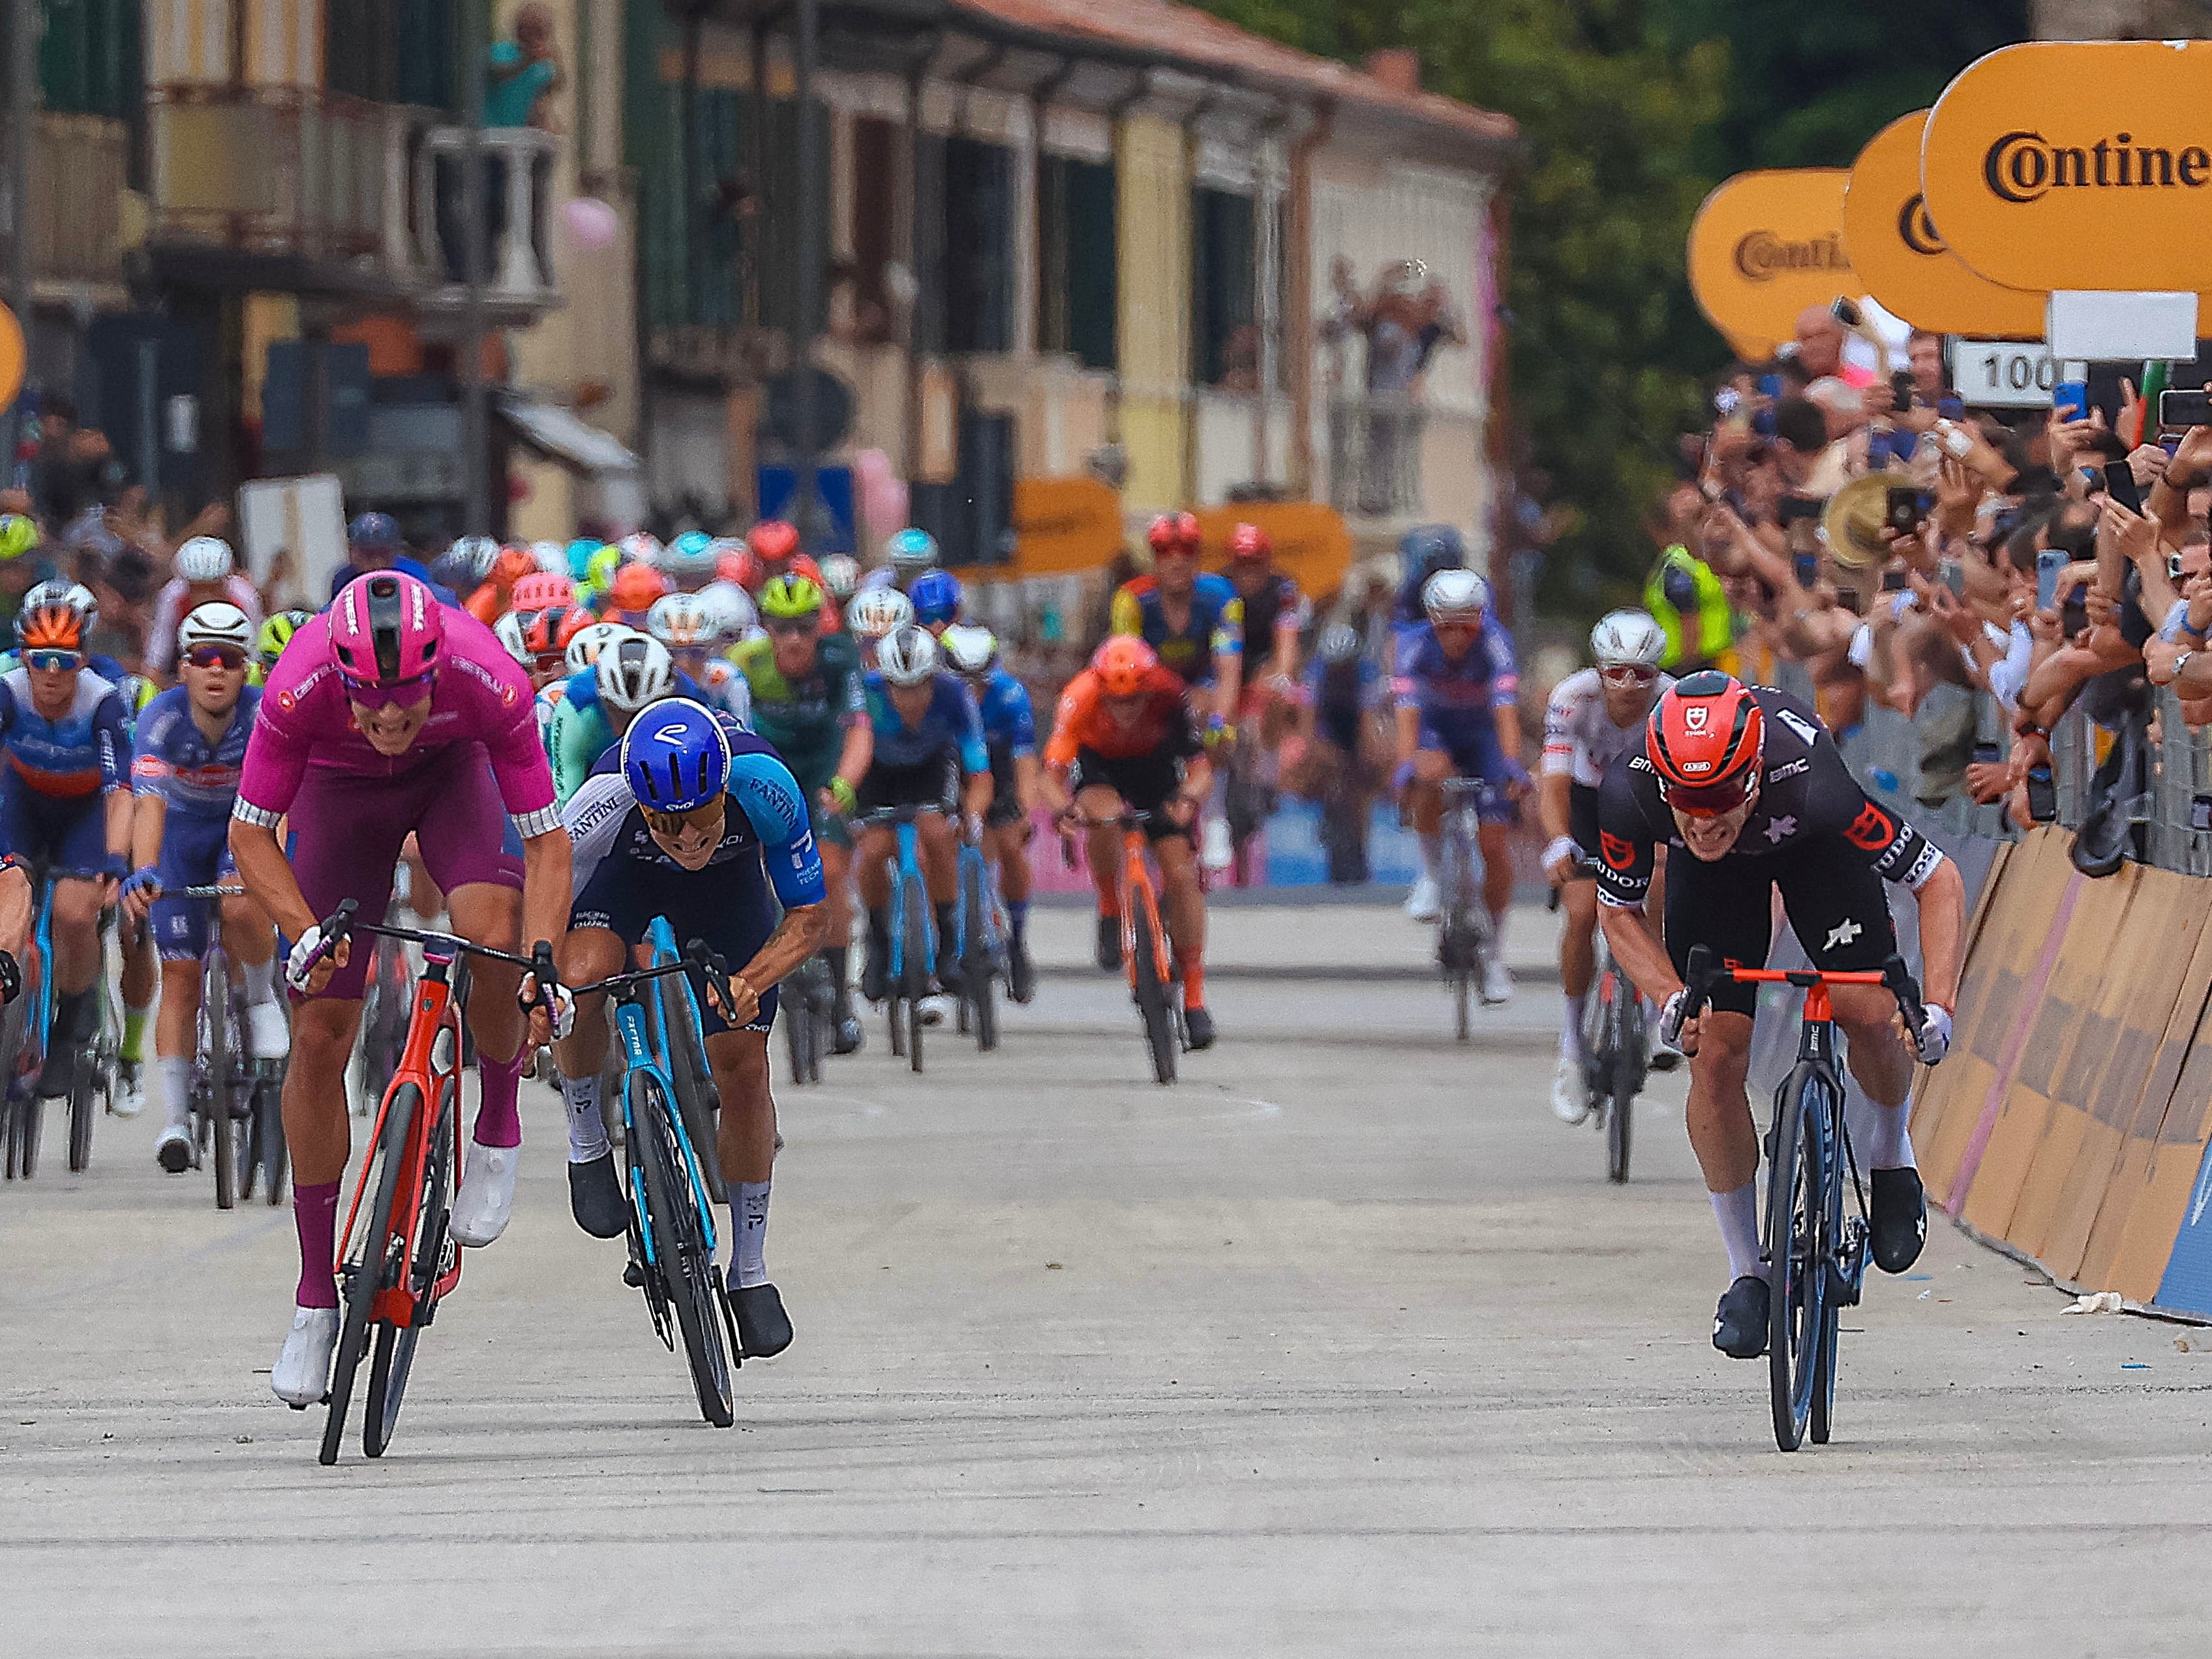 Emotional fourth place for Dainese in 'hometown finish' at Giro d'Italia